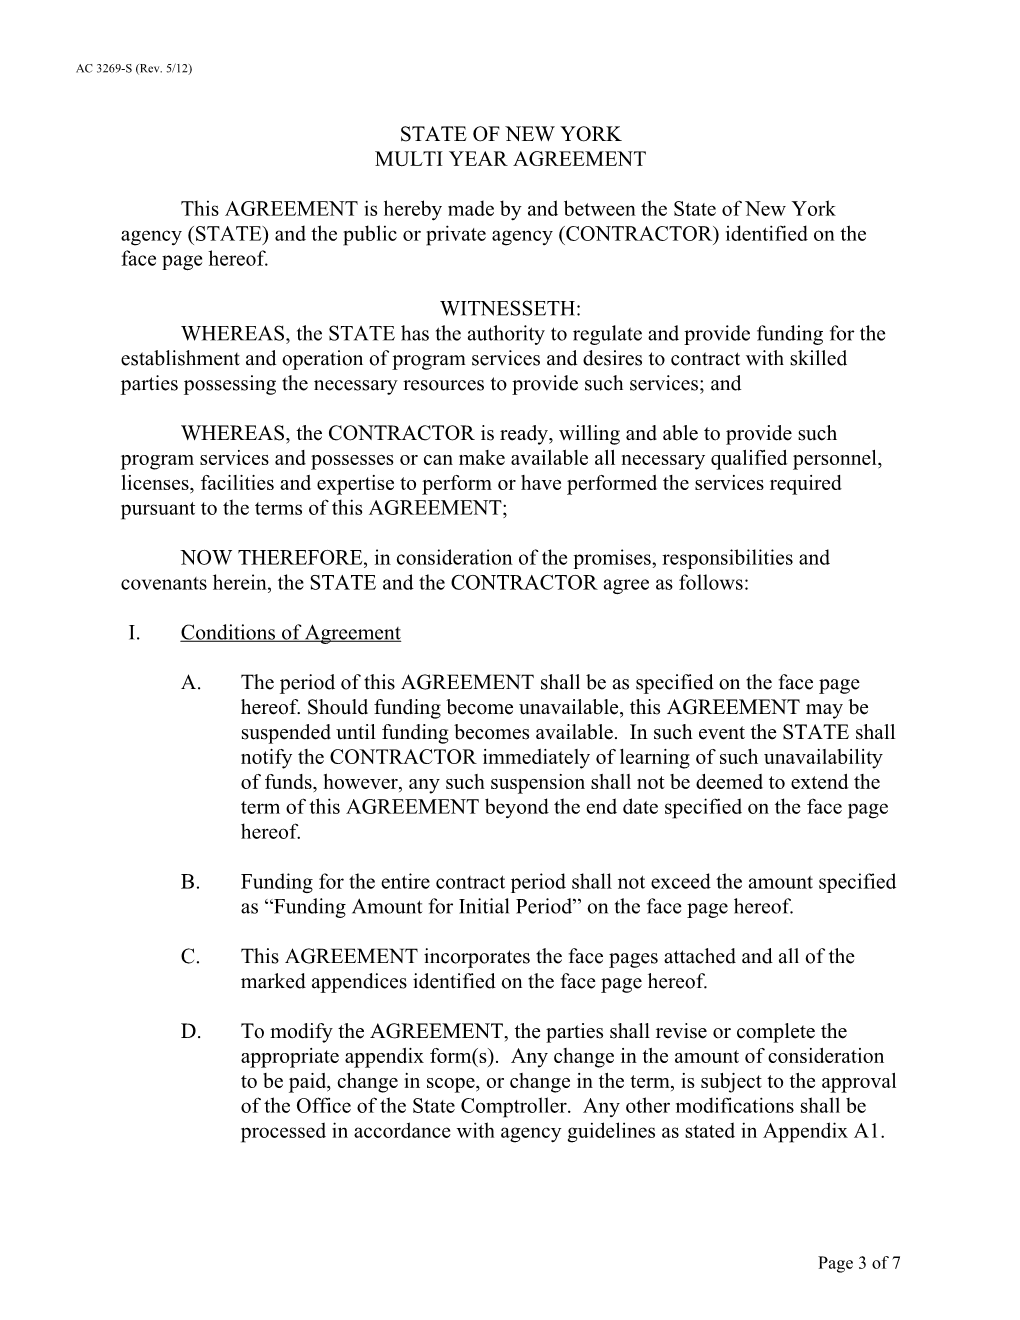 State of New York Multi-Year Agreement